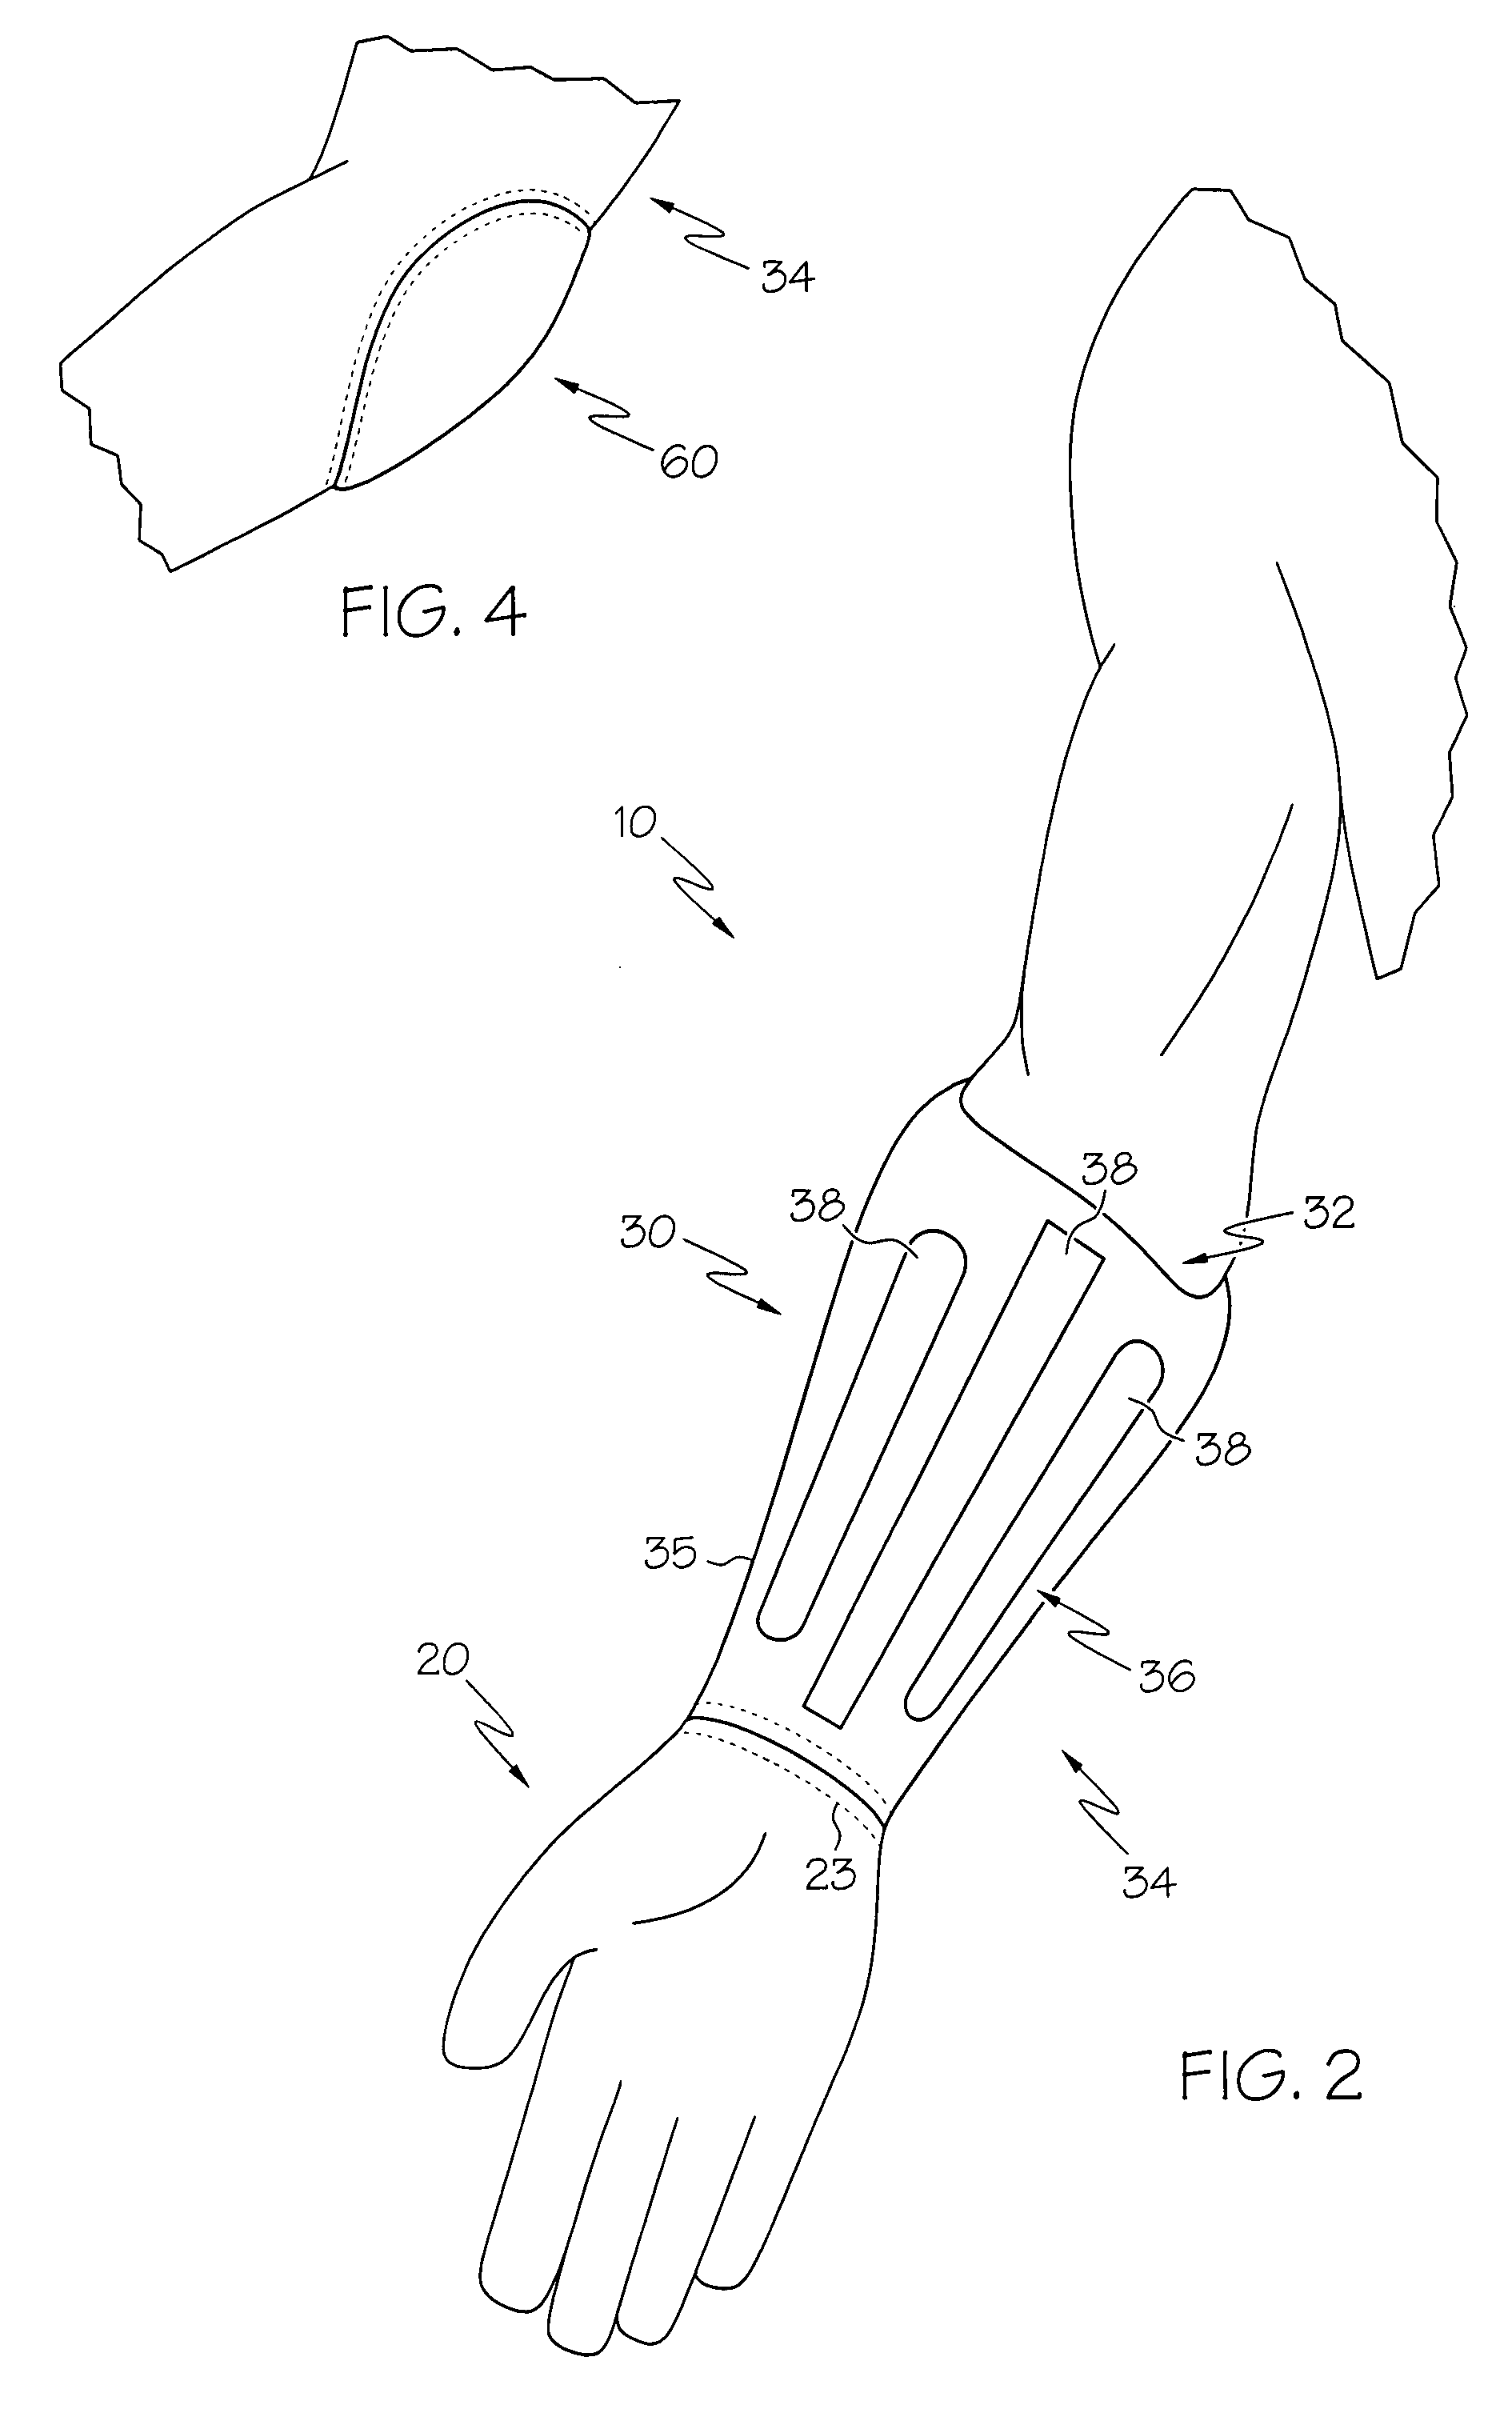 Device for the hand and forearm of the user